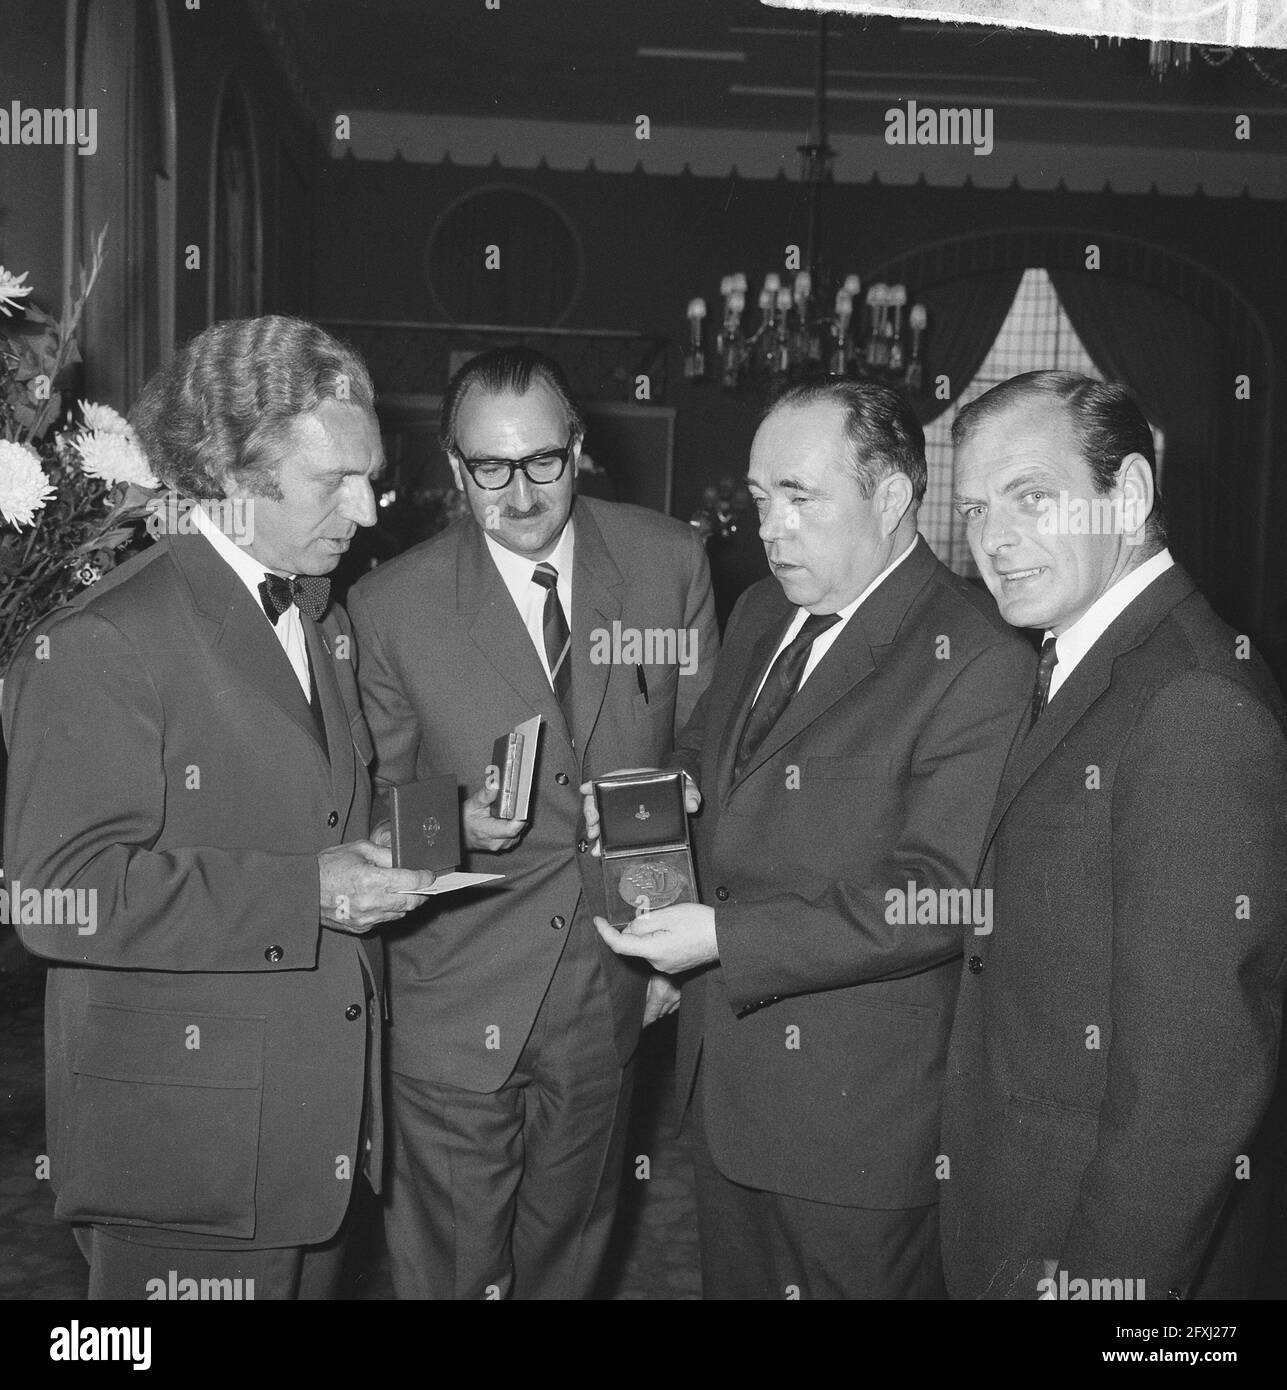 Winners ANWB prize 1965 in The Hague, from left to right Herman van der  Horst, Hans Wiersma, Mathieu Smedts and Nico van Vliet, June 2, 1965,  Winners, prizes, The Netherlands, 20th century